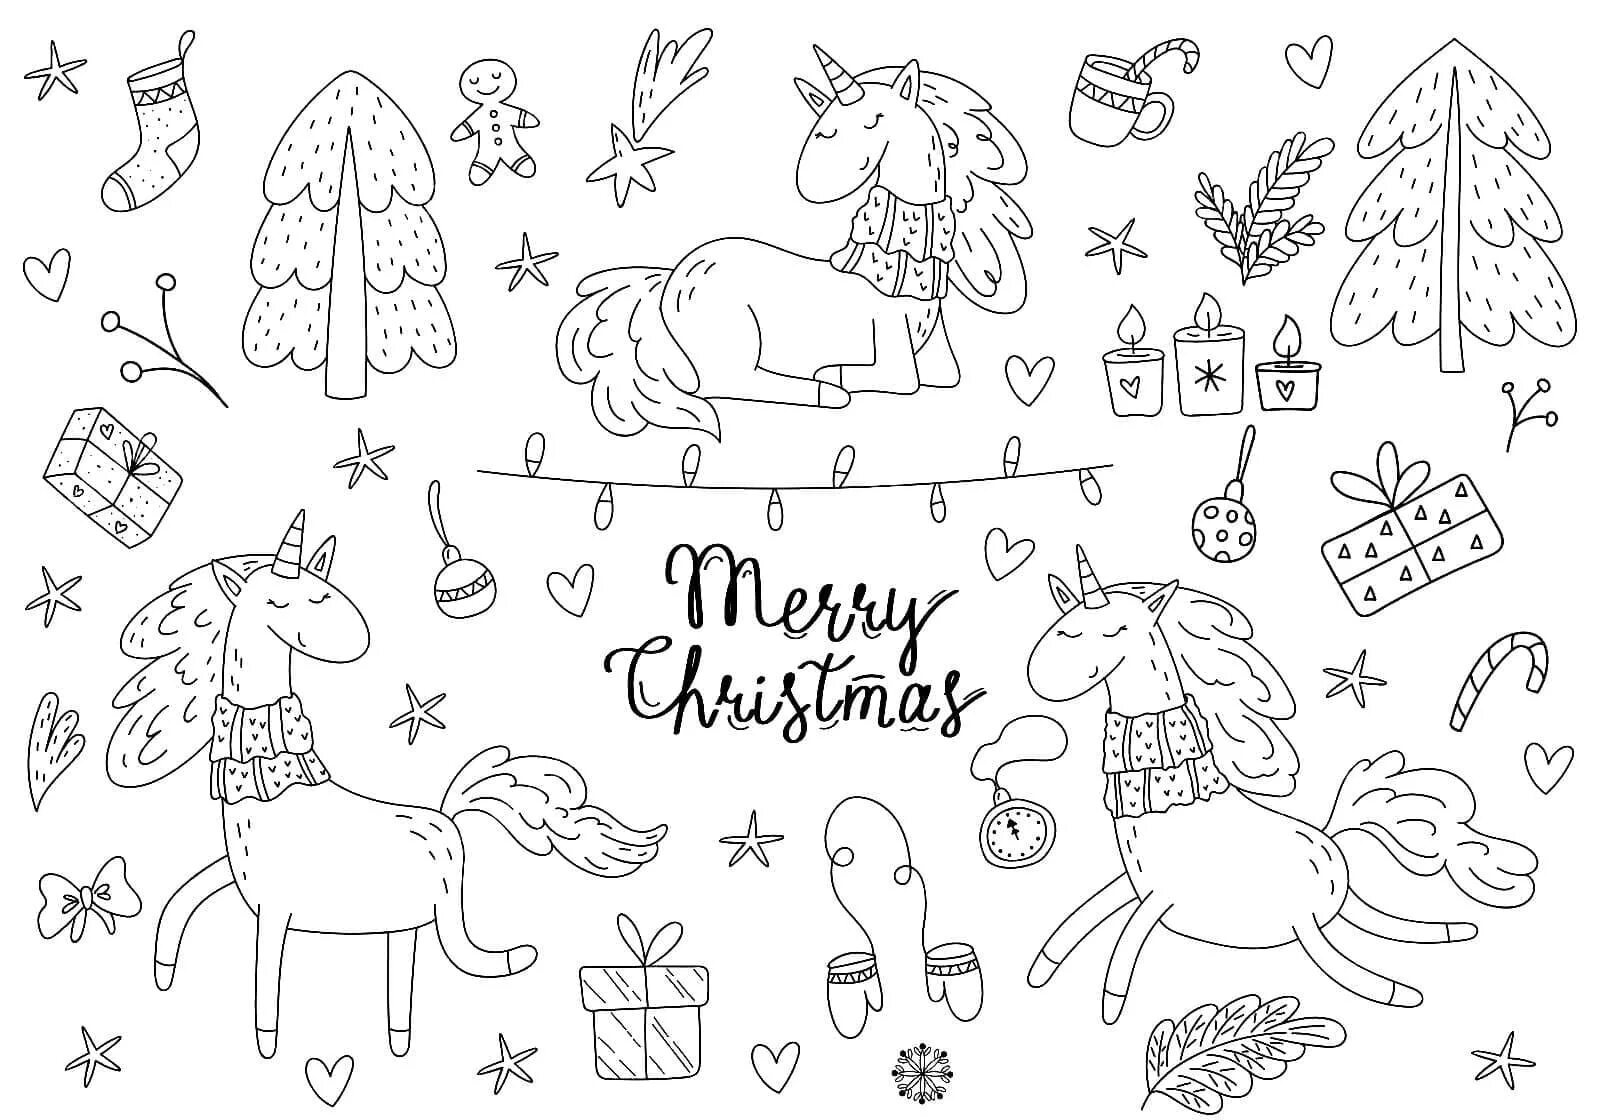 Royal new year unicorn coloring page